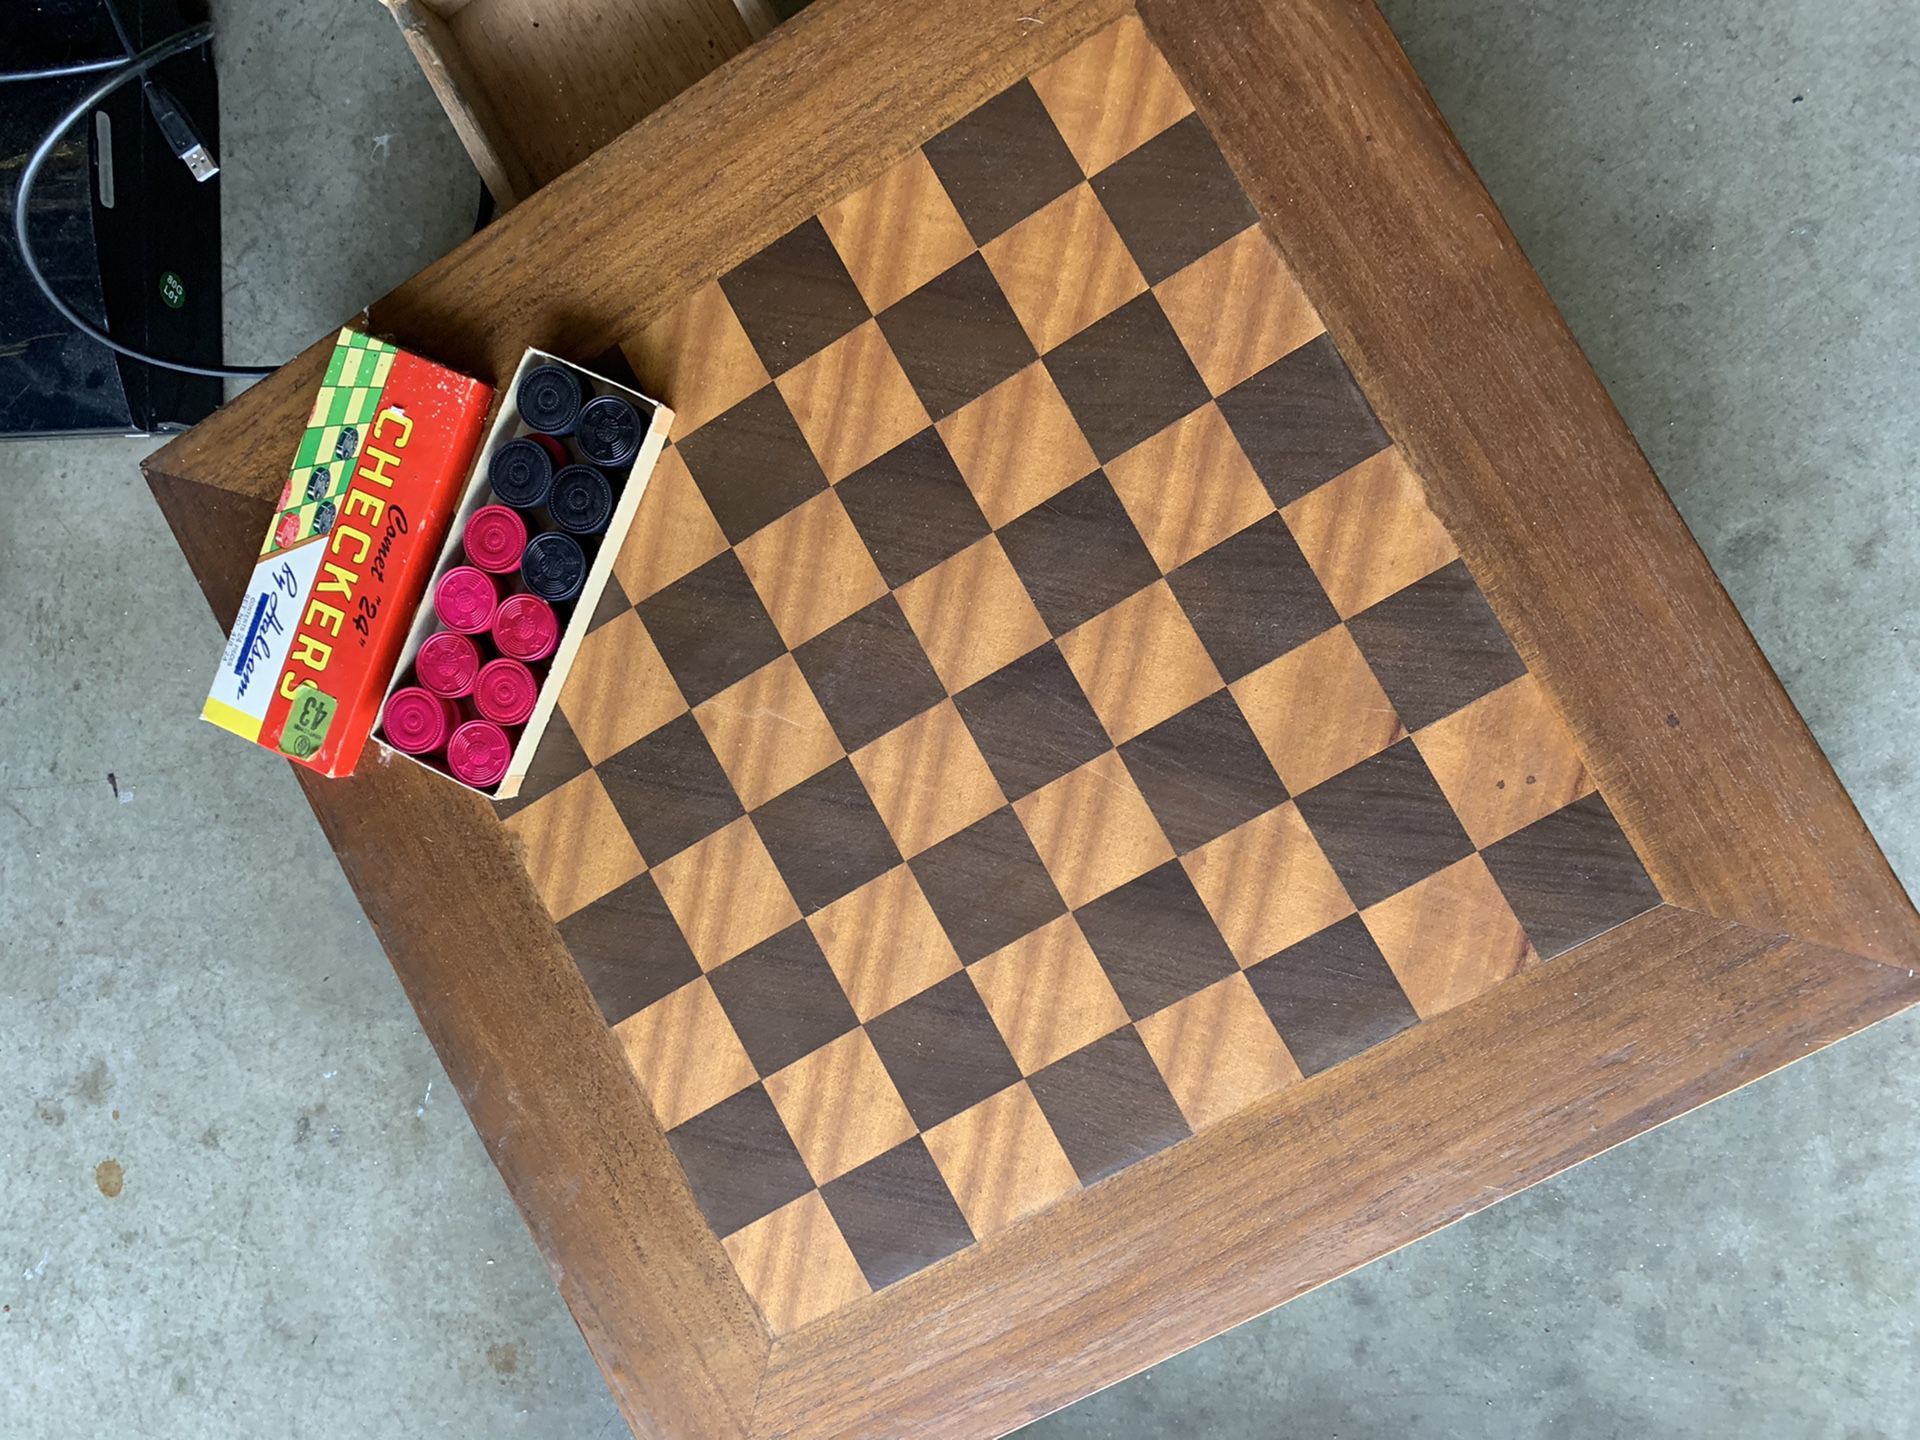 RARE VTG CHINESE MING CHESS BOARD TABLE WALNUT GORGEOUS MID-CENTURY MODERN - Post 1940’s